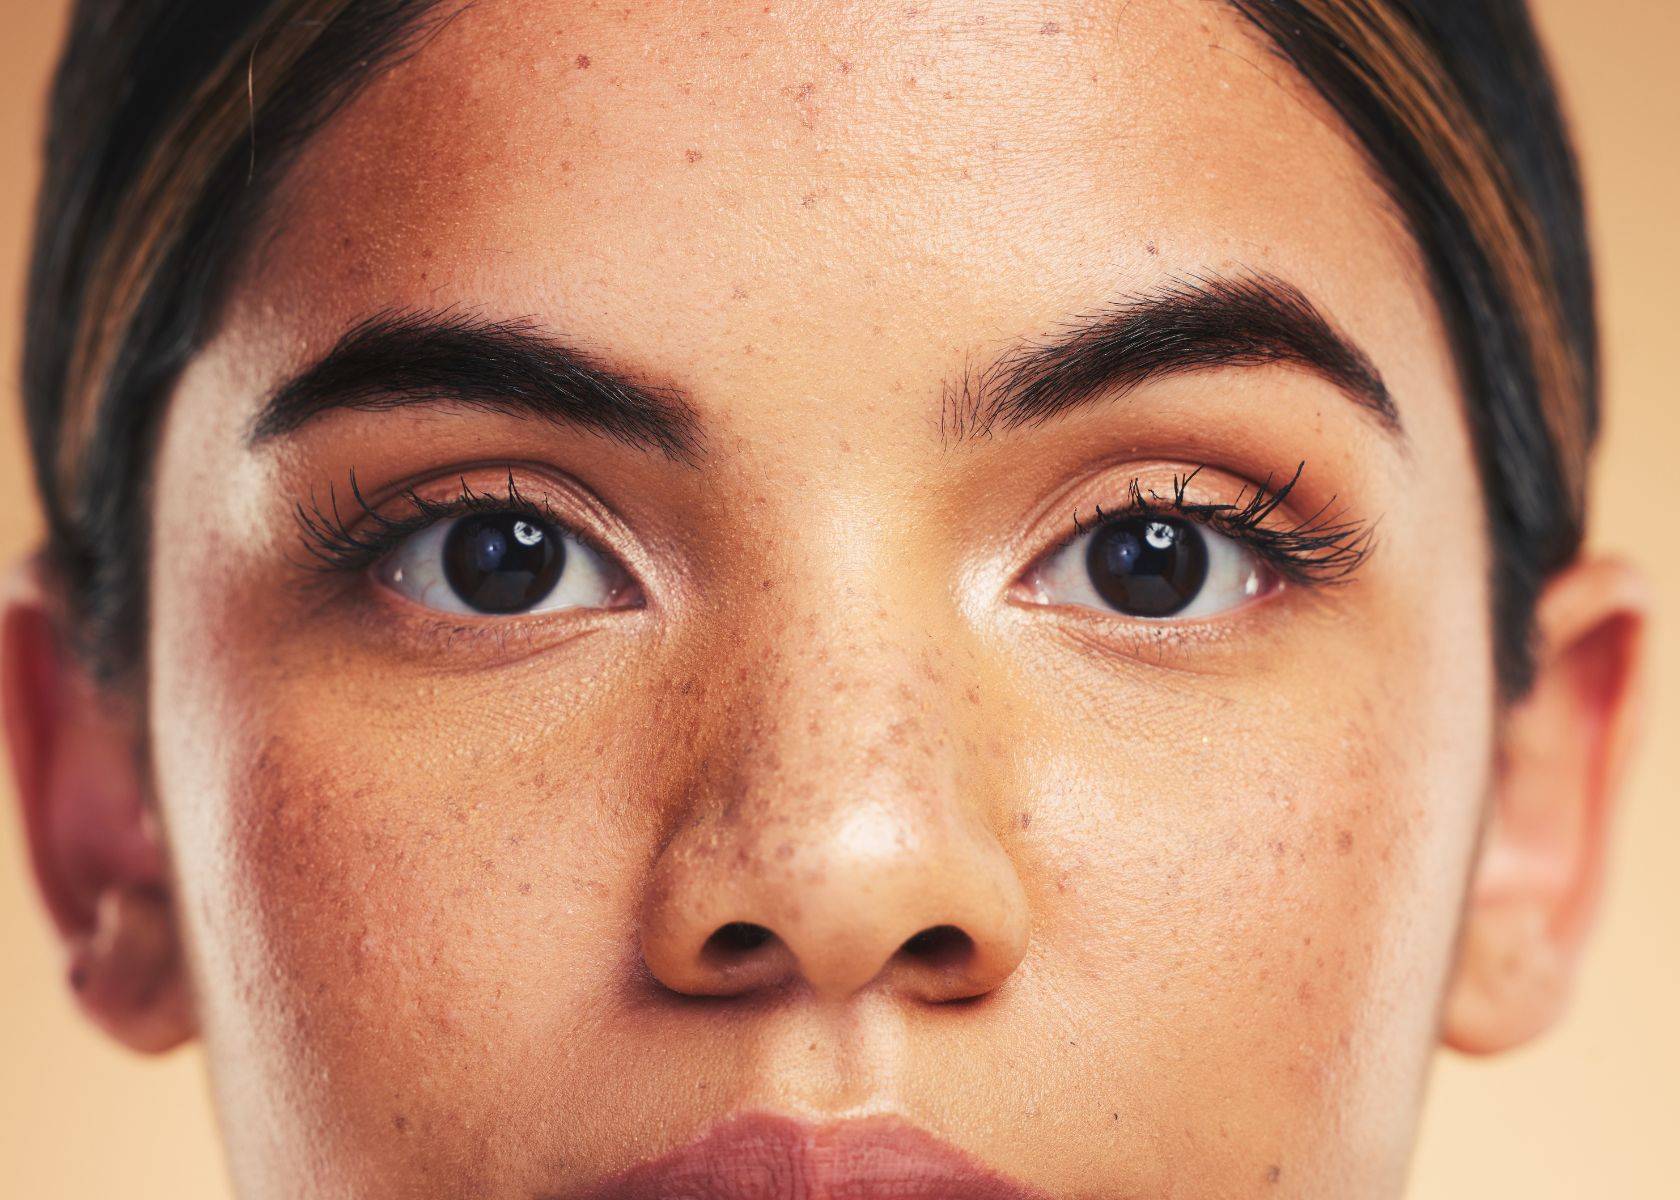 Causes of Melasma and Hyperpigmentation